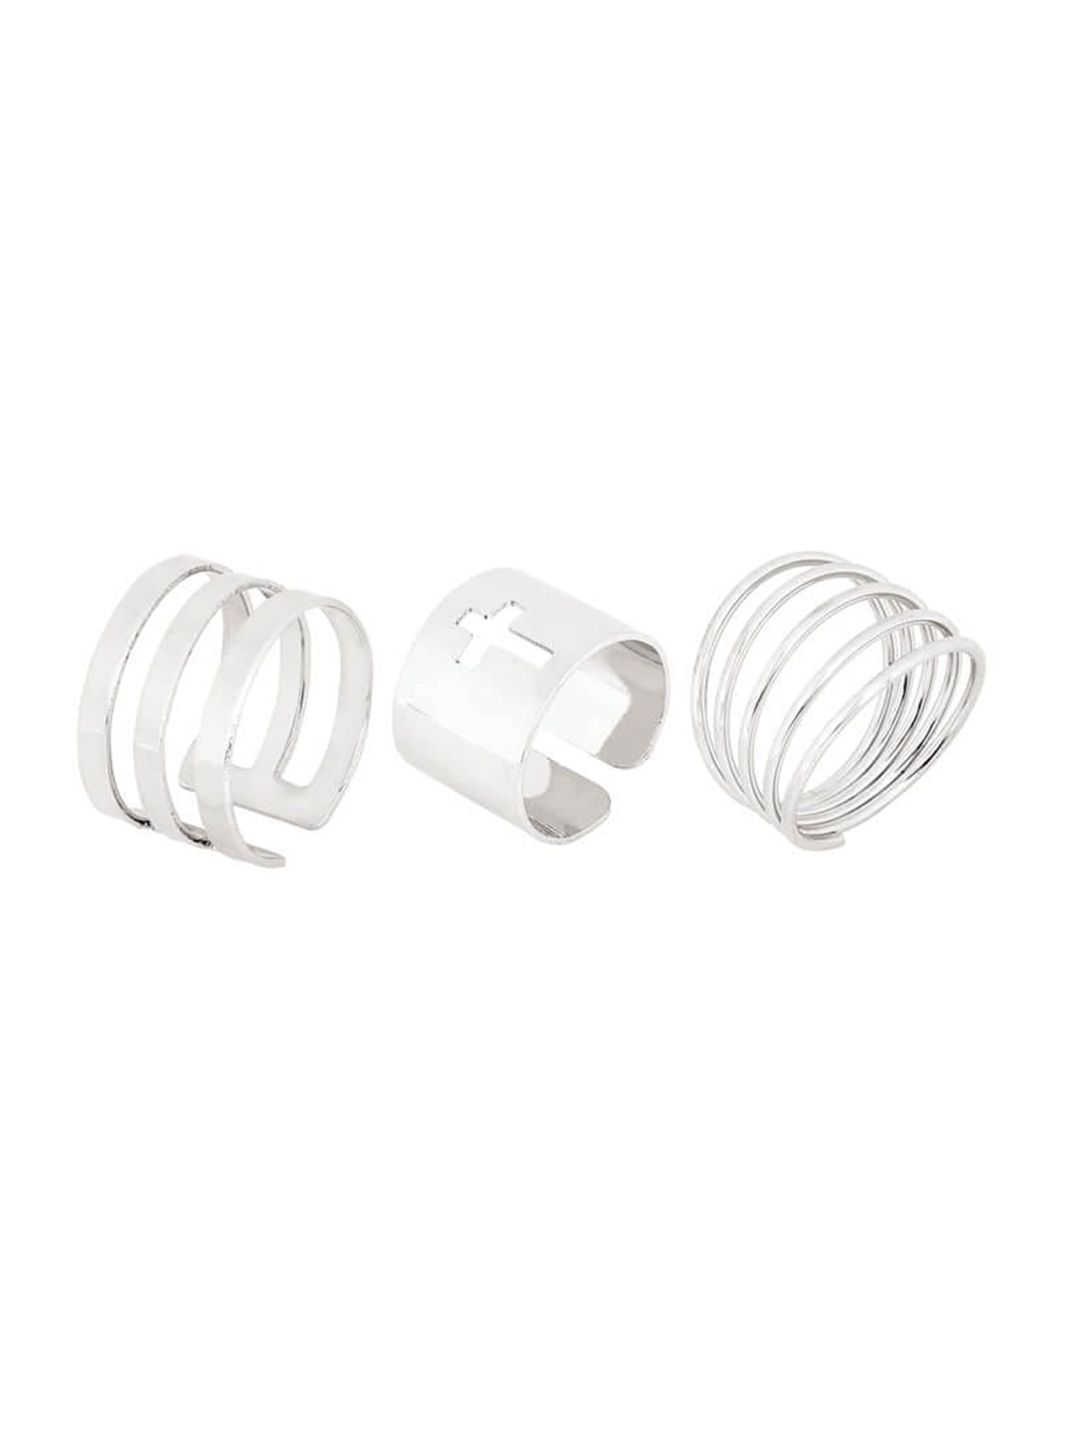 FemNmas Set Of 3 Silver-Plated Adjustable Finger Rings Price in India